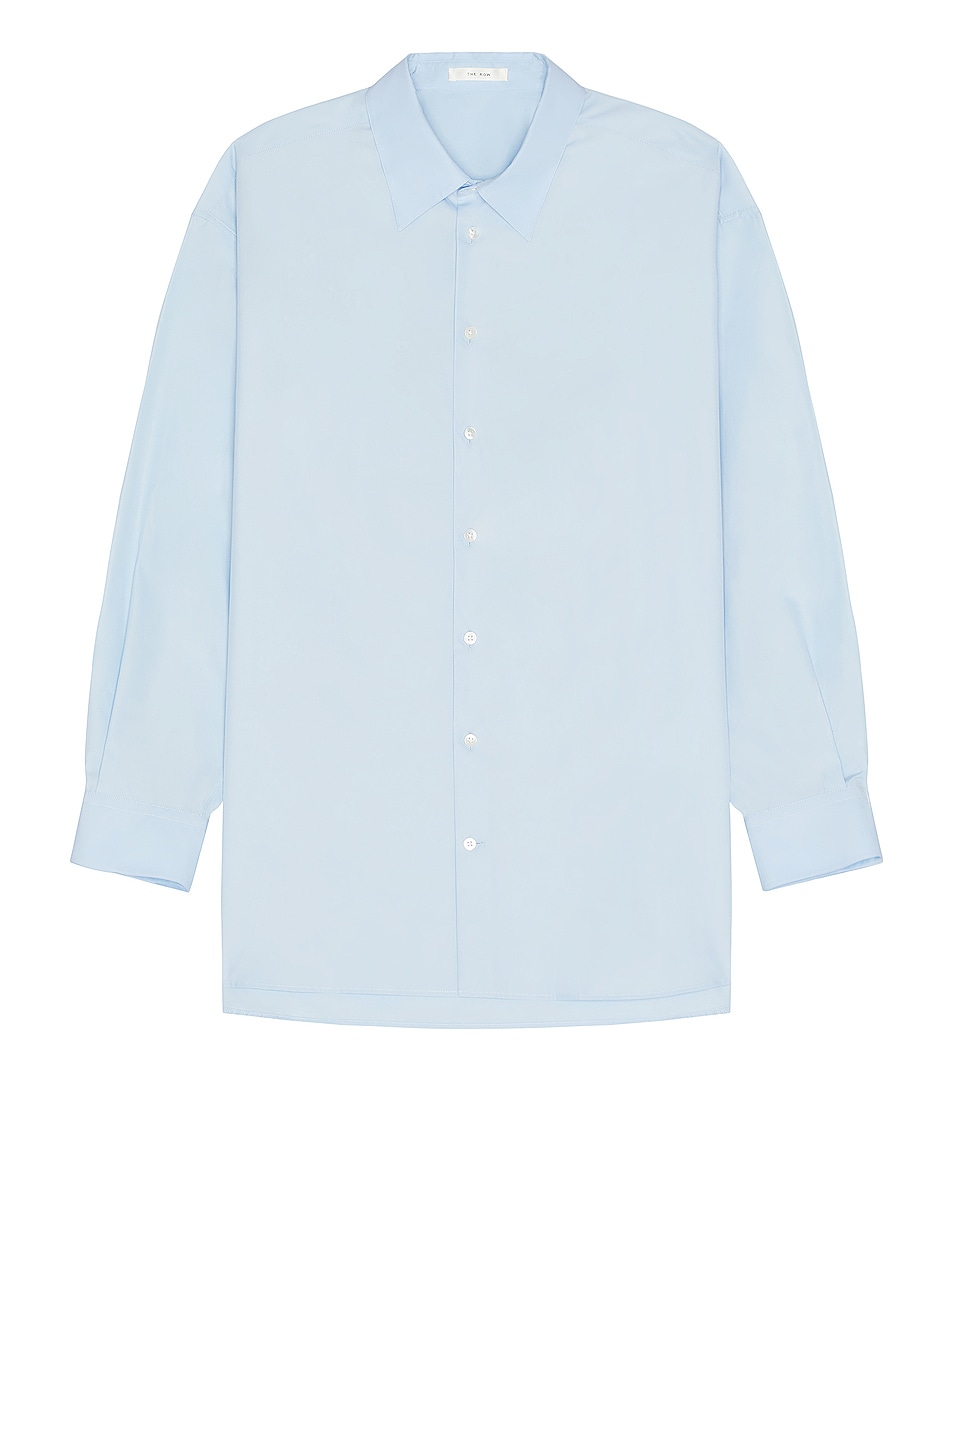 Image 1 of The Row Lukre Shirt in Powder Blue